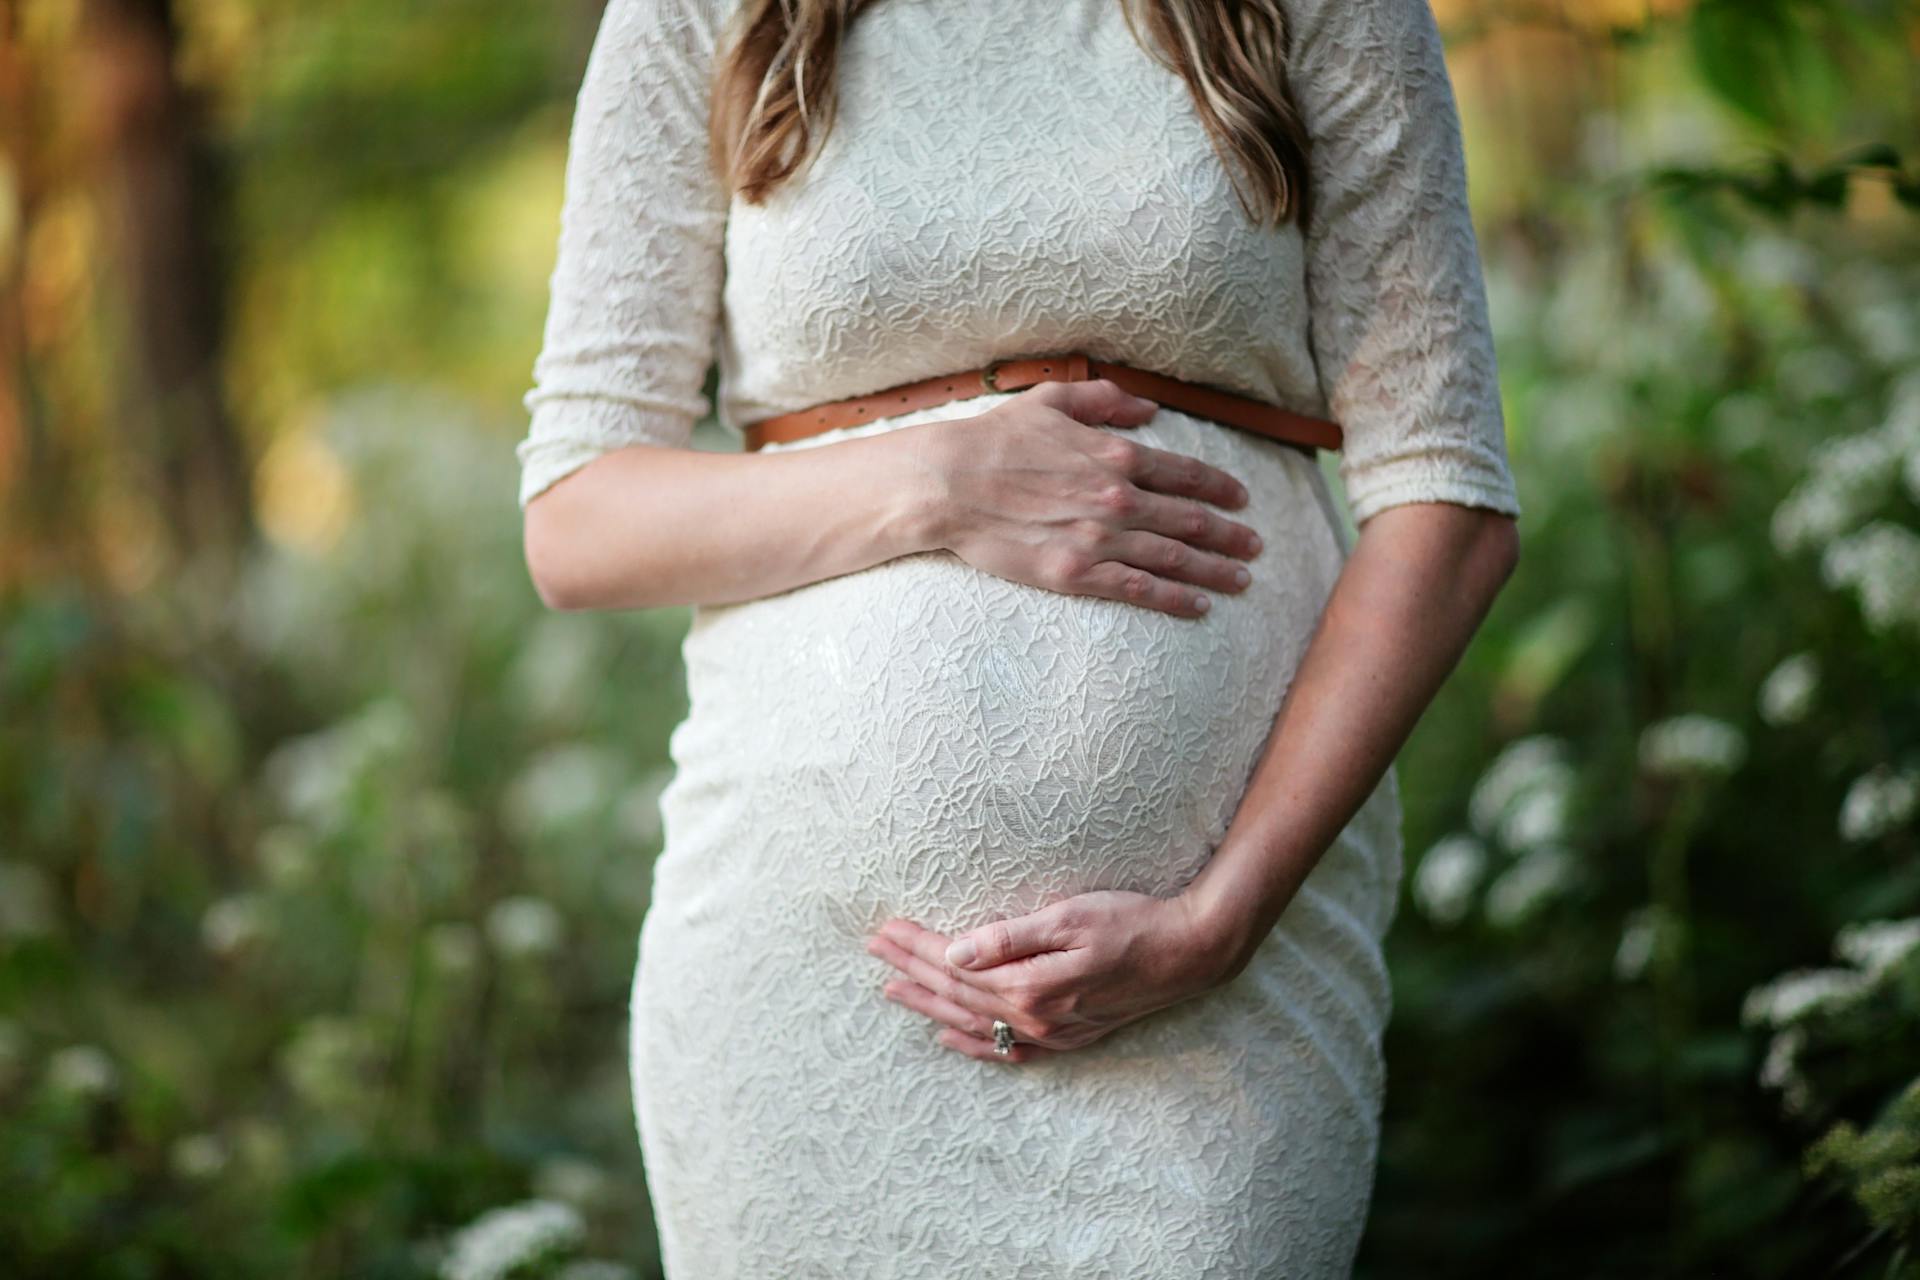 A pregnant woman holding her baby bump | Source: Pexels